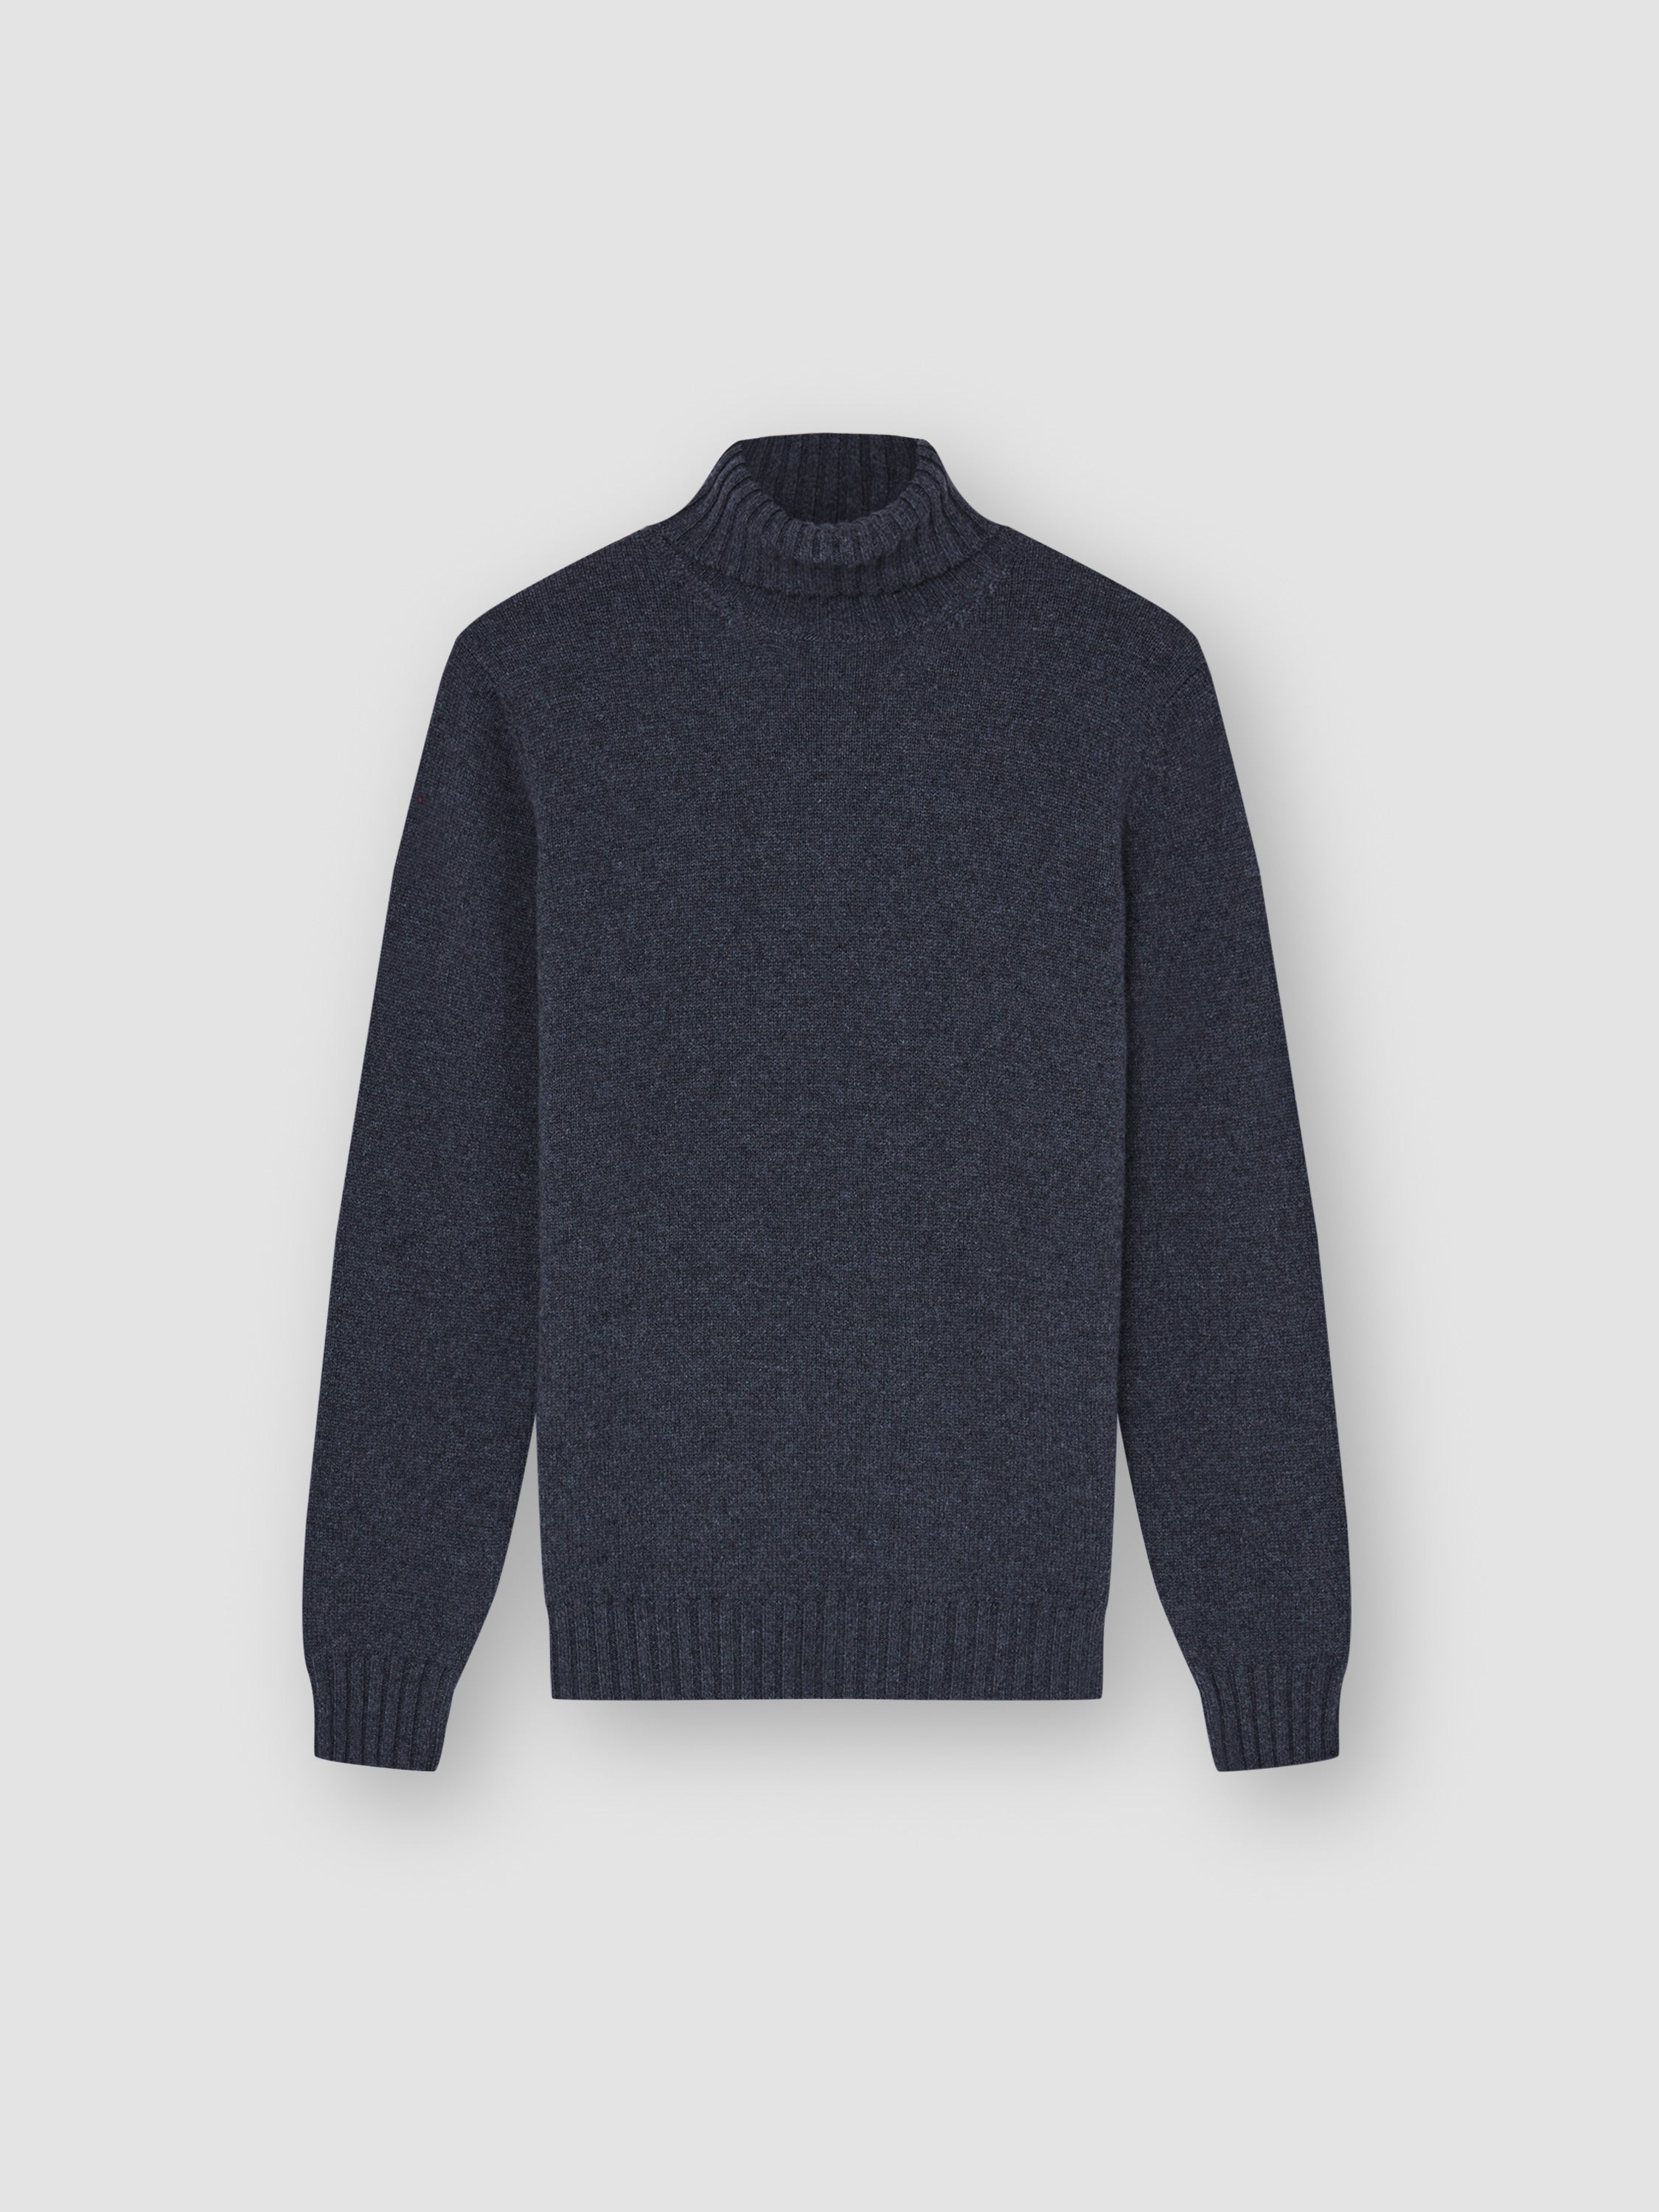 Cashmere Roll neck Sweater Steel Grey Product Image